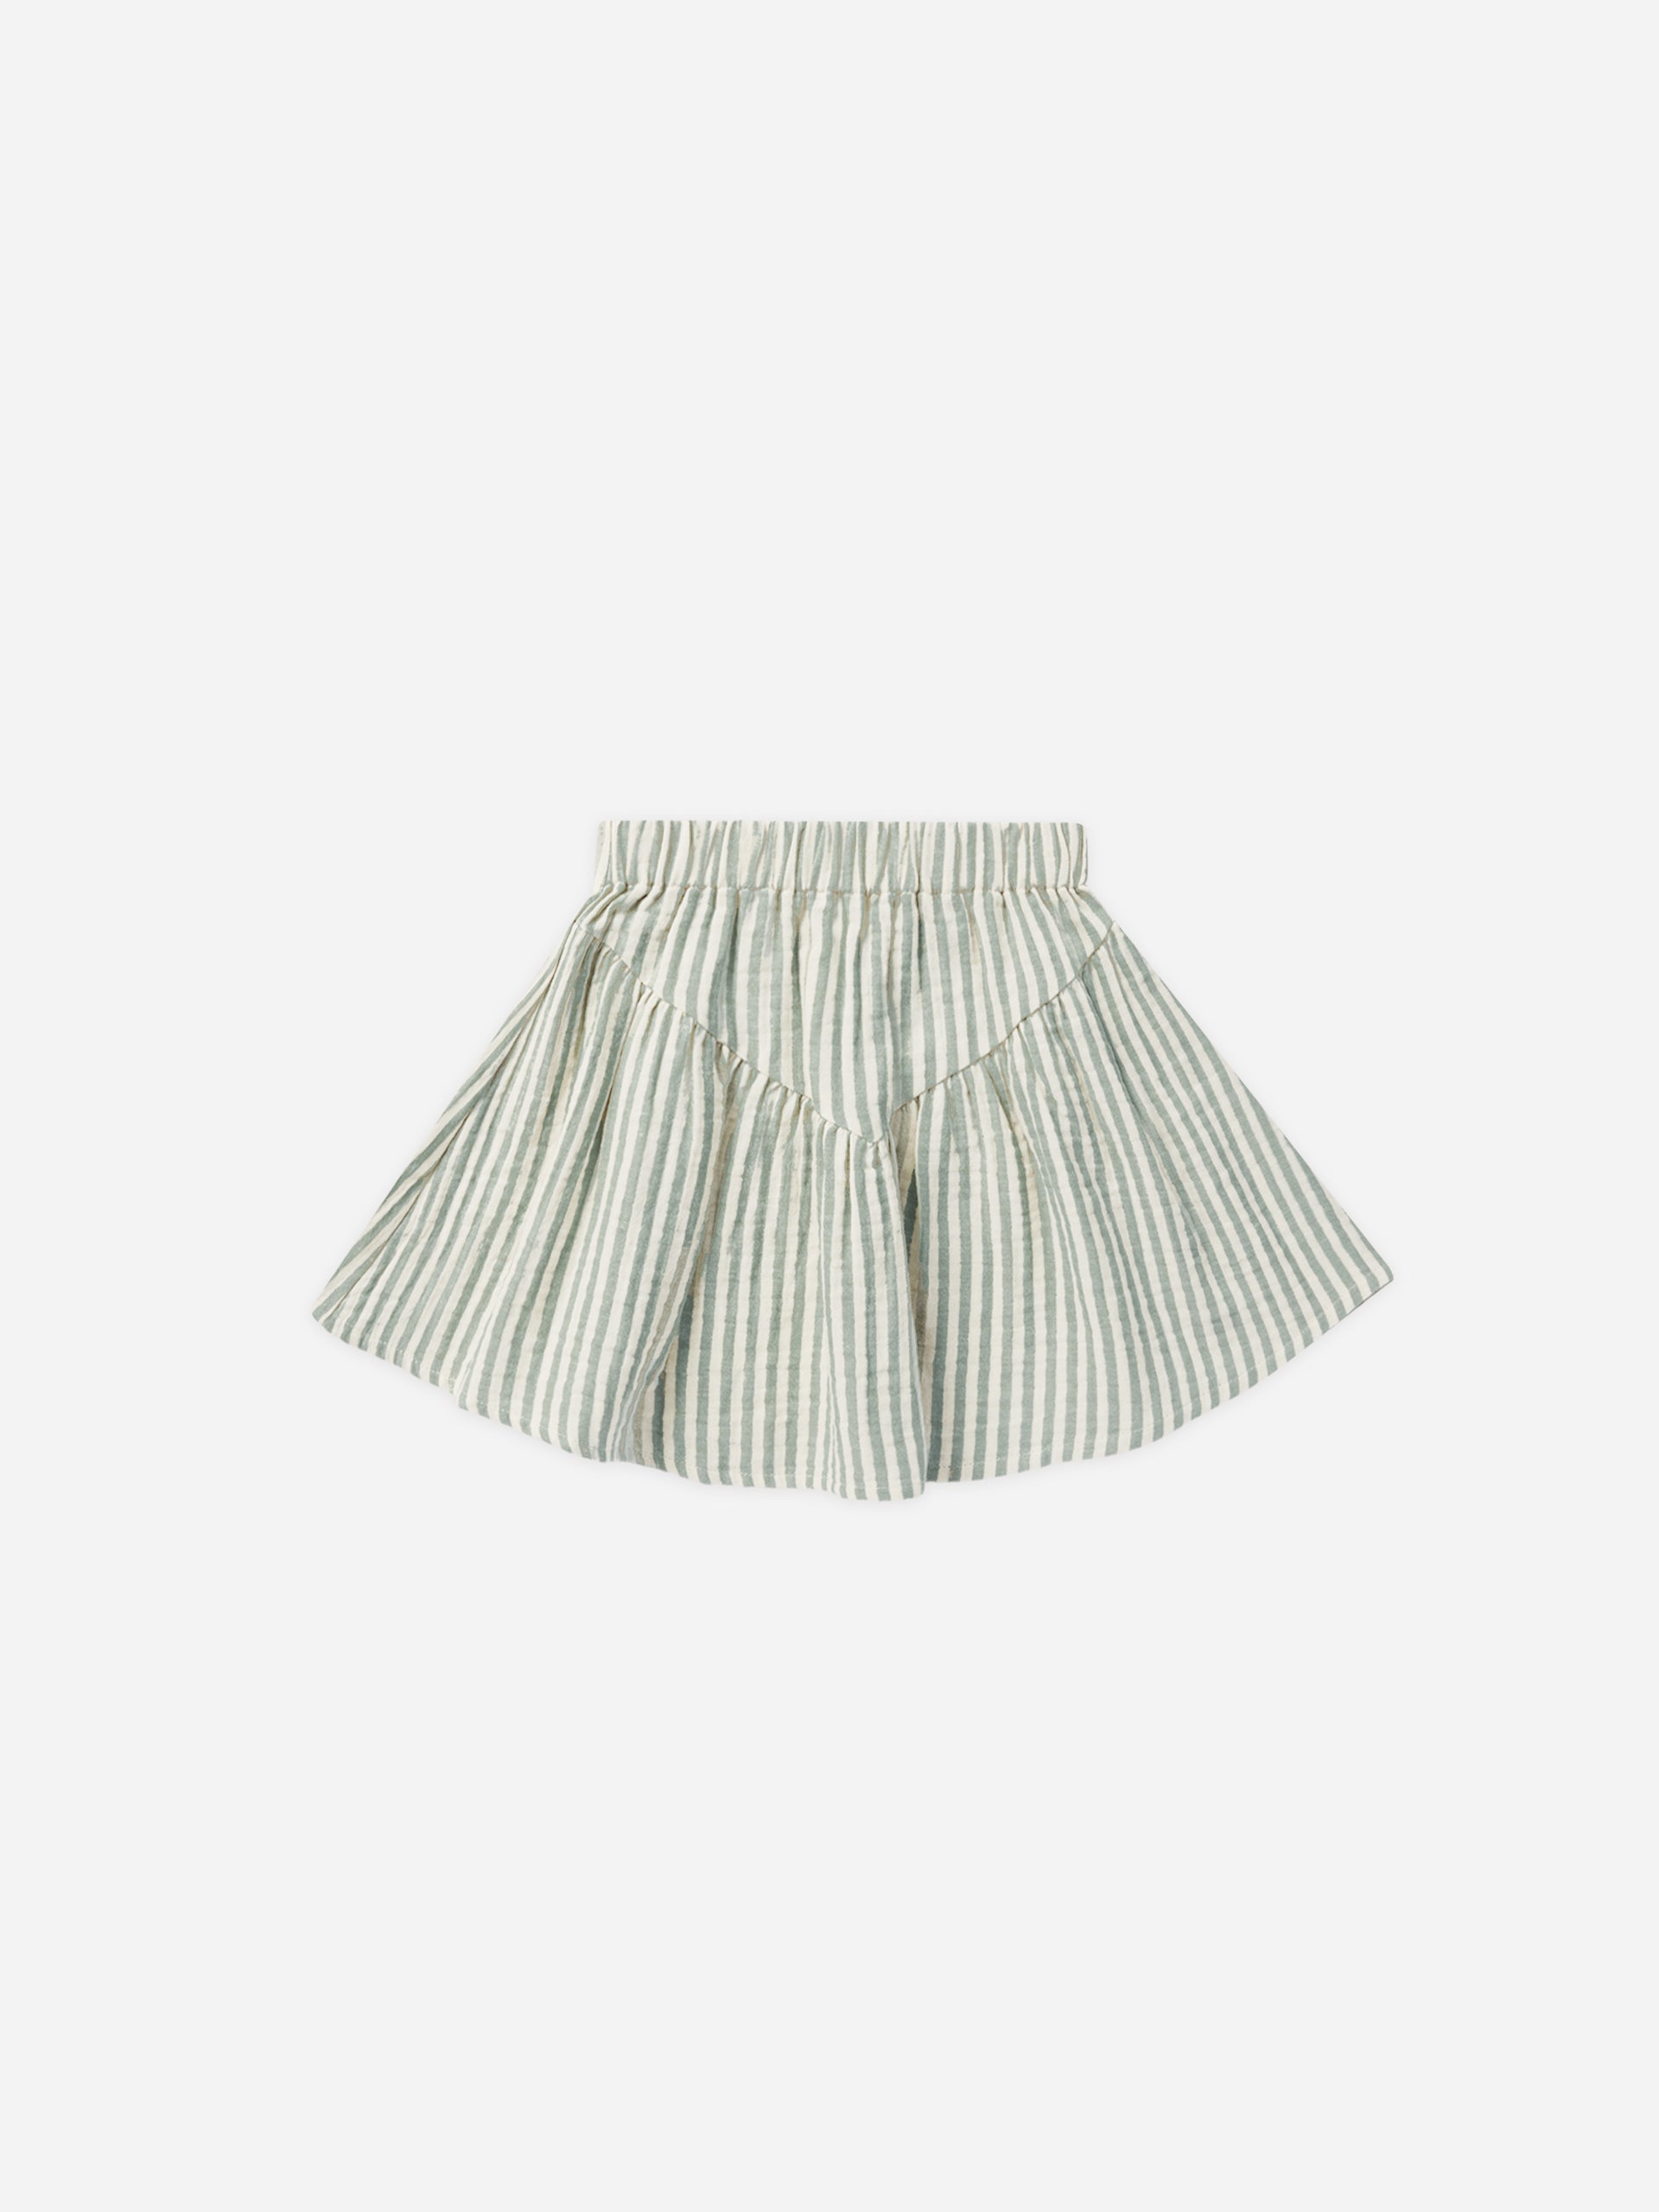 Sparrow Skirt || Summer Stripe - Rylee + Cru | Kids Clothes | Trendy Baby Clothes | Modern Infant Outfits |